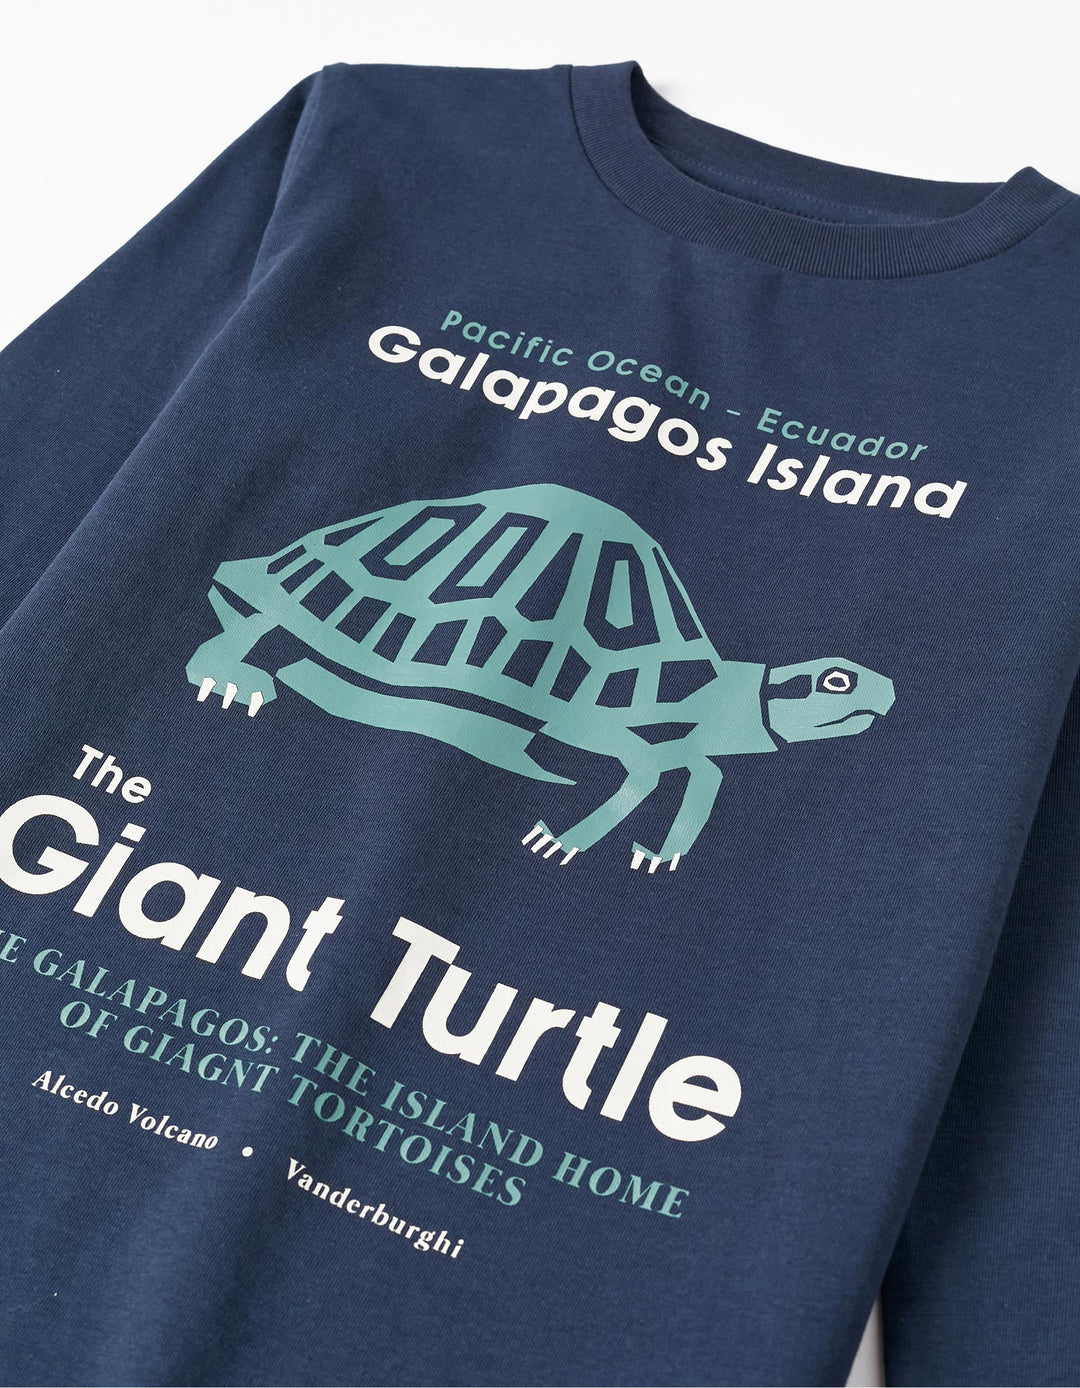 Pack 2 Cotton T-shirts for Boys 'Giant Turtle', Dark Blue/Grey